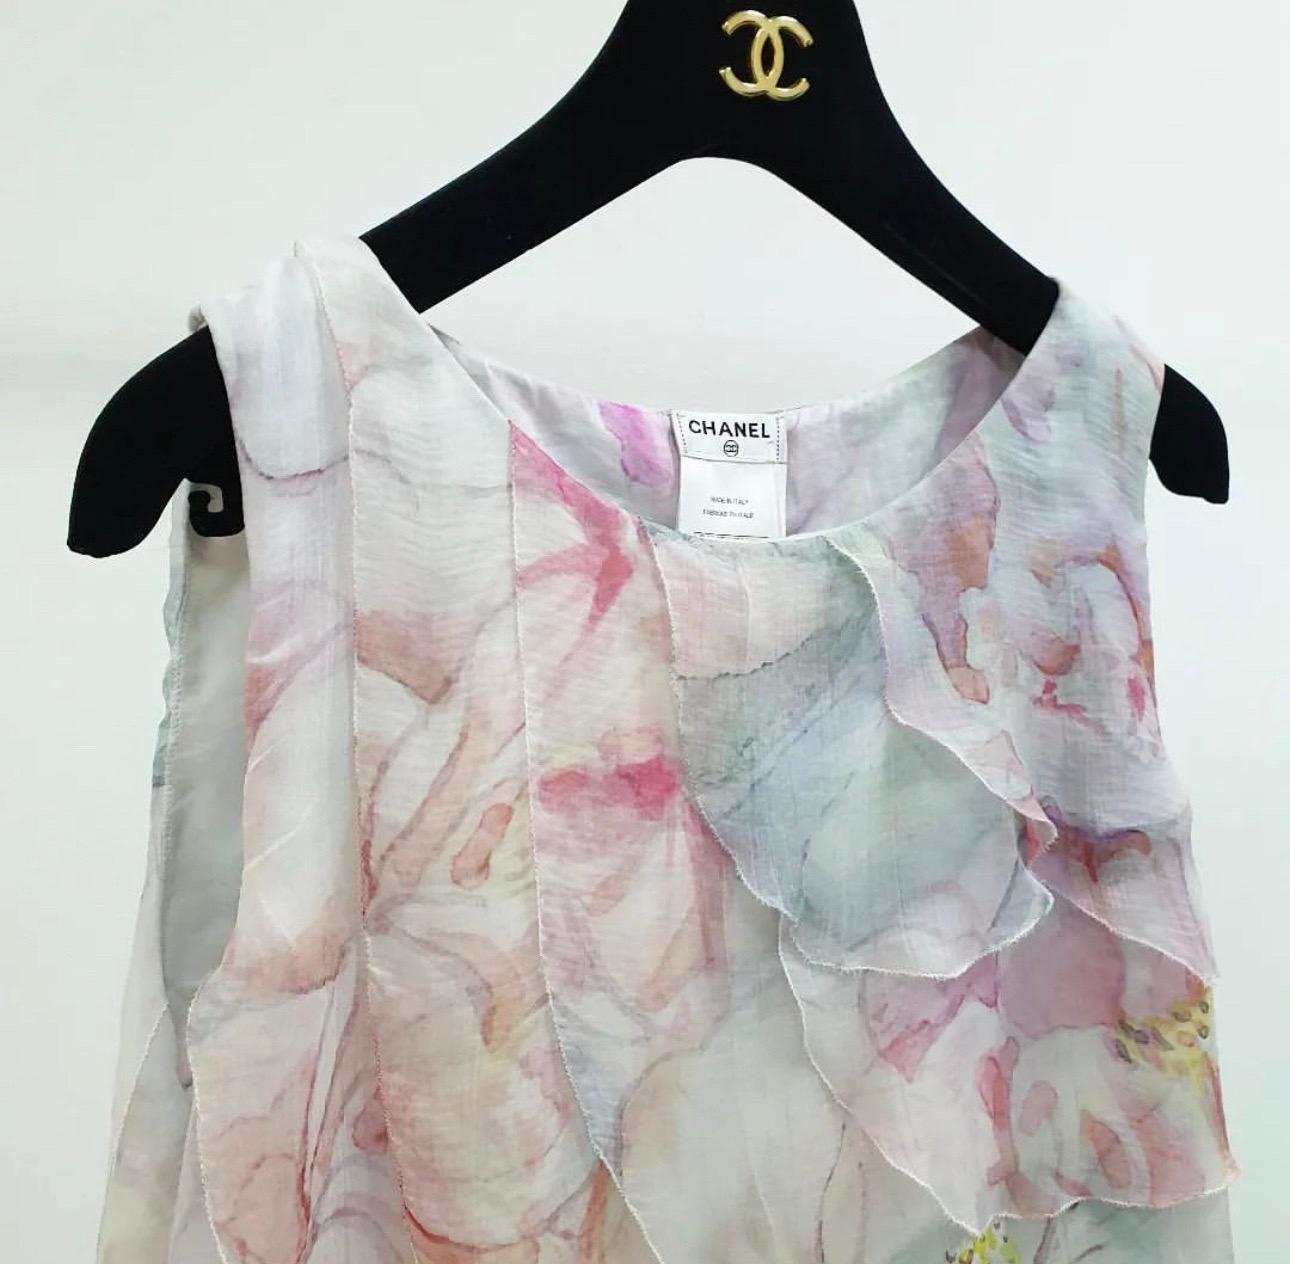 Perfect for spring summer and easy to dress up and down through the day, this Chanel sleeveless blouse is a must have feminine fashion piece.
Designed in multicoloured floral watercolour print cotton fabric, this blouse features a collar and